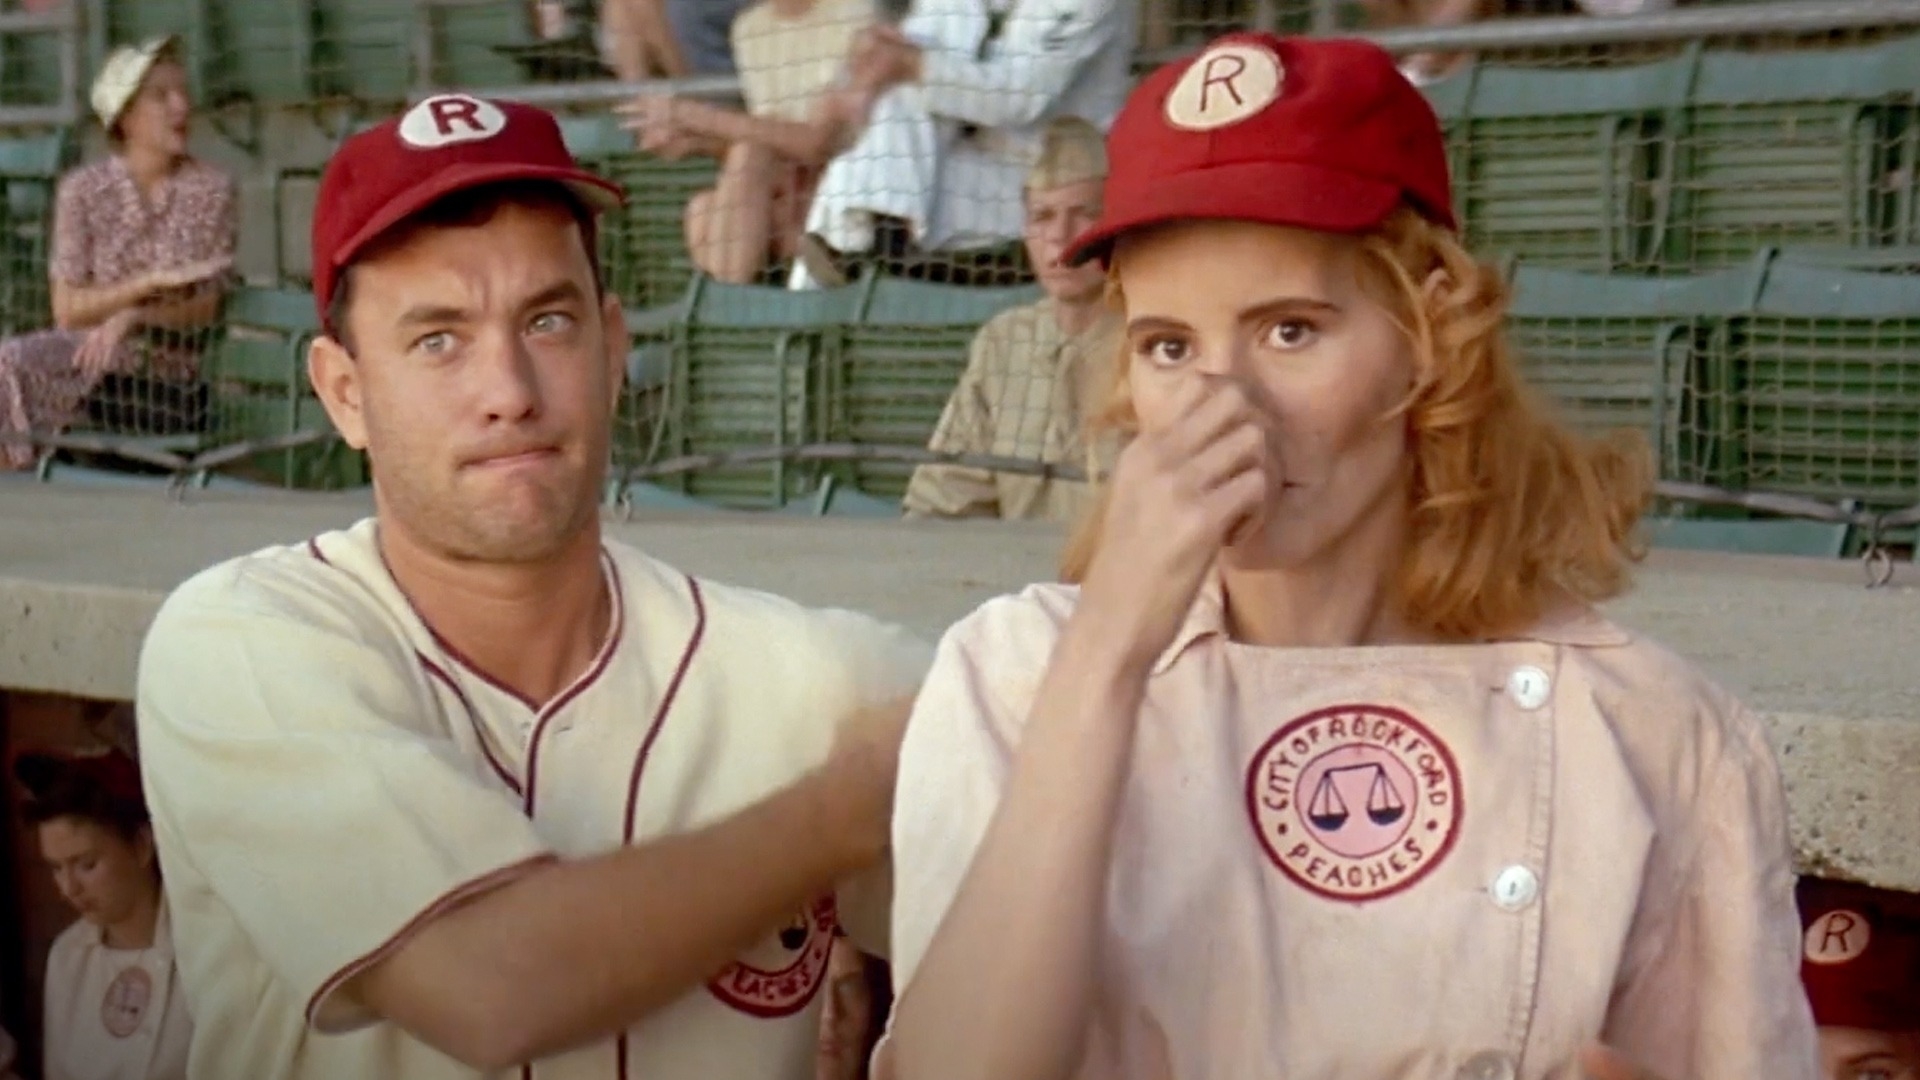 Tom Hanks and Geena Davis in a baseball uniform, looking surprised, in the film &#x27;A League of Their Own&#x27;